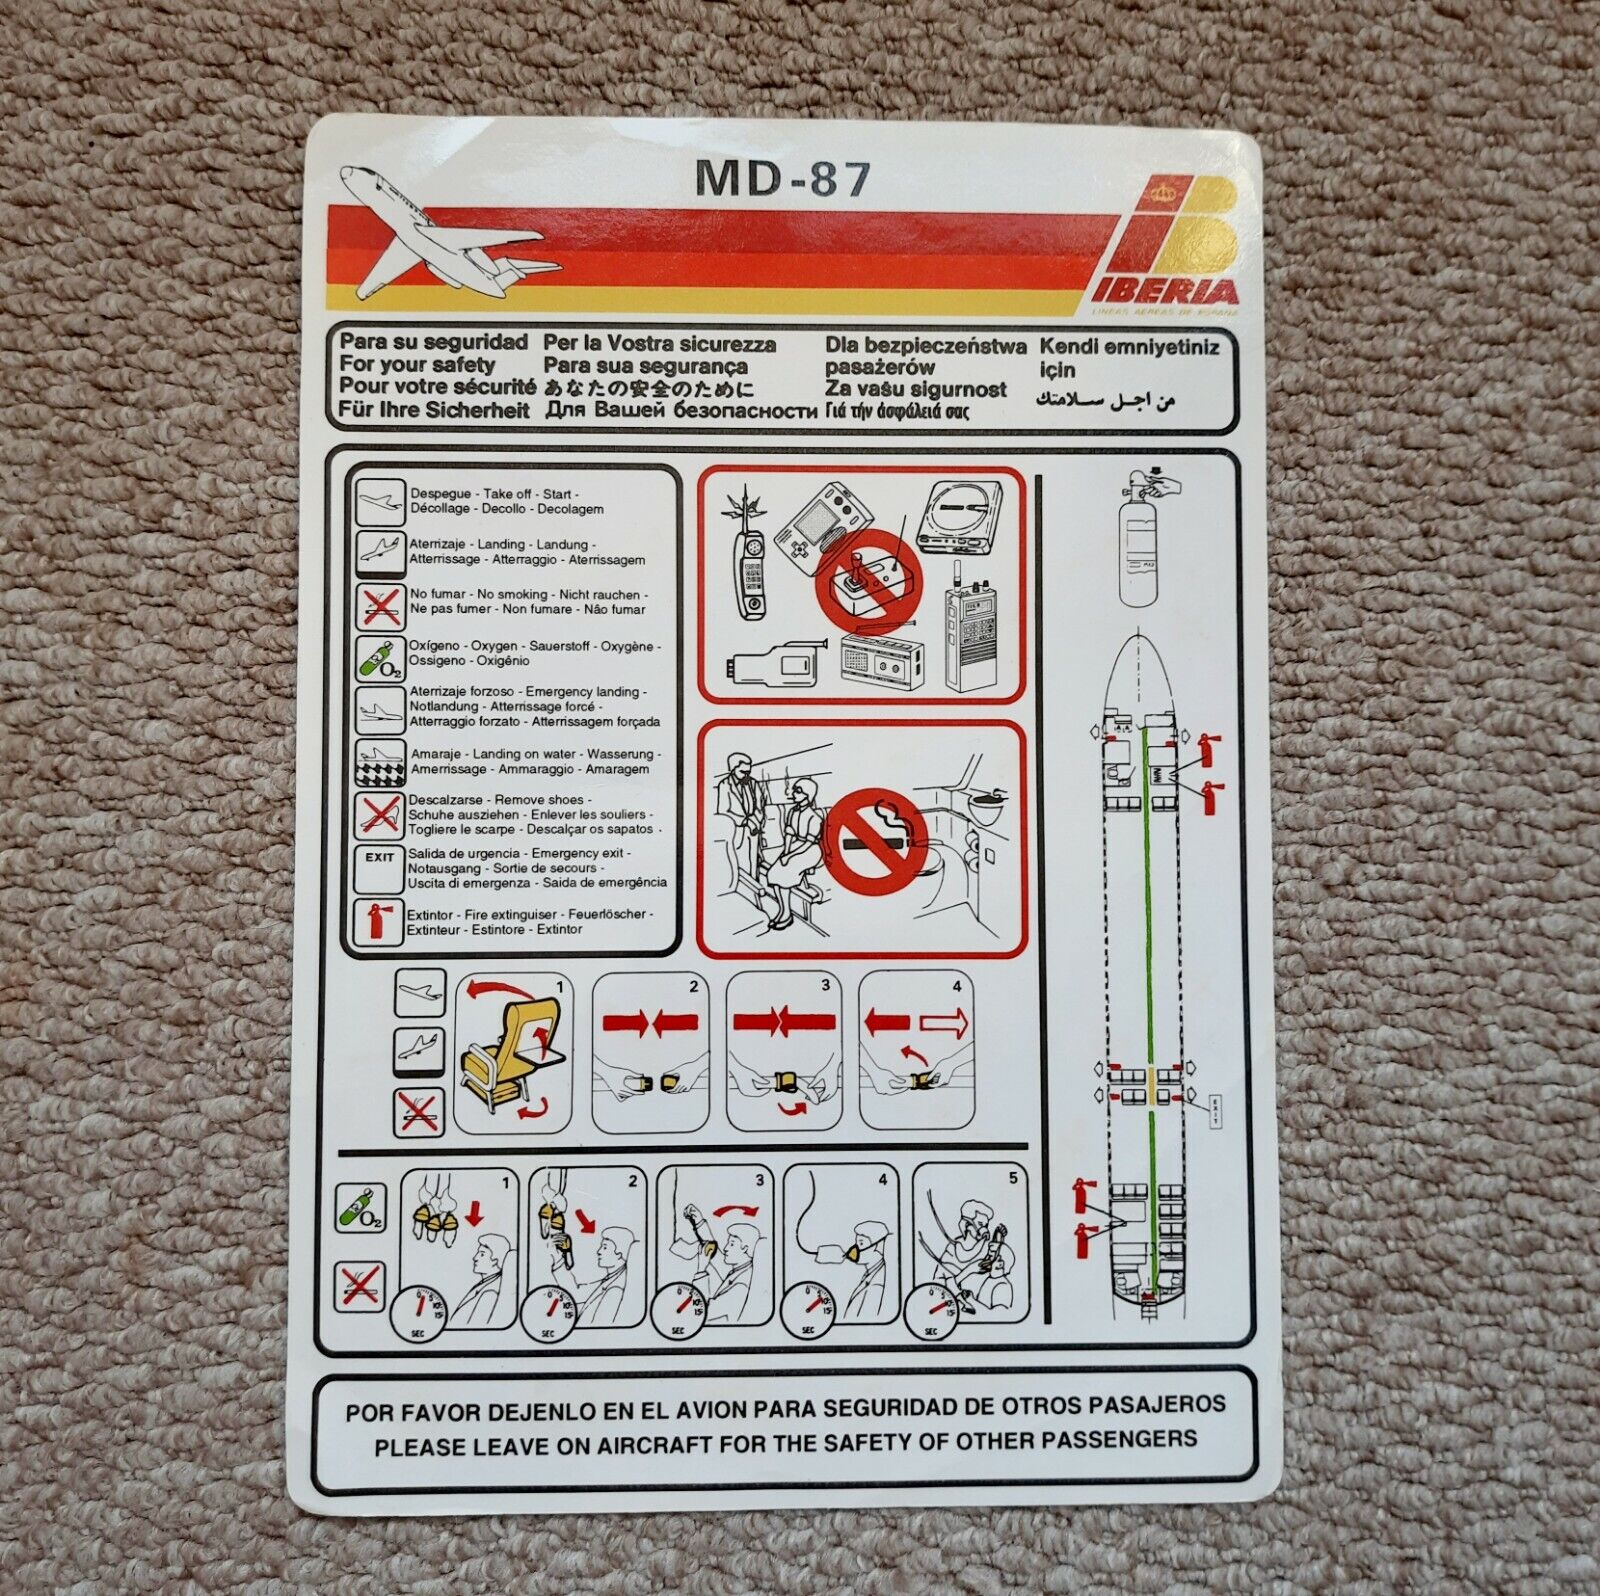 Iberia MD-87 Safety Card (Jun 93) - very good condition